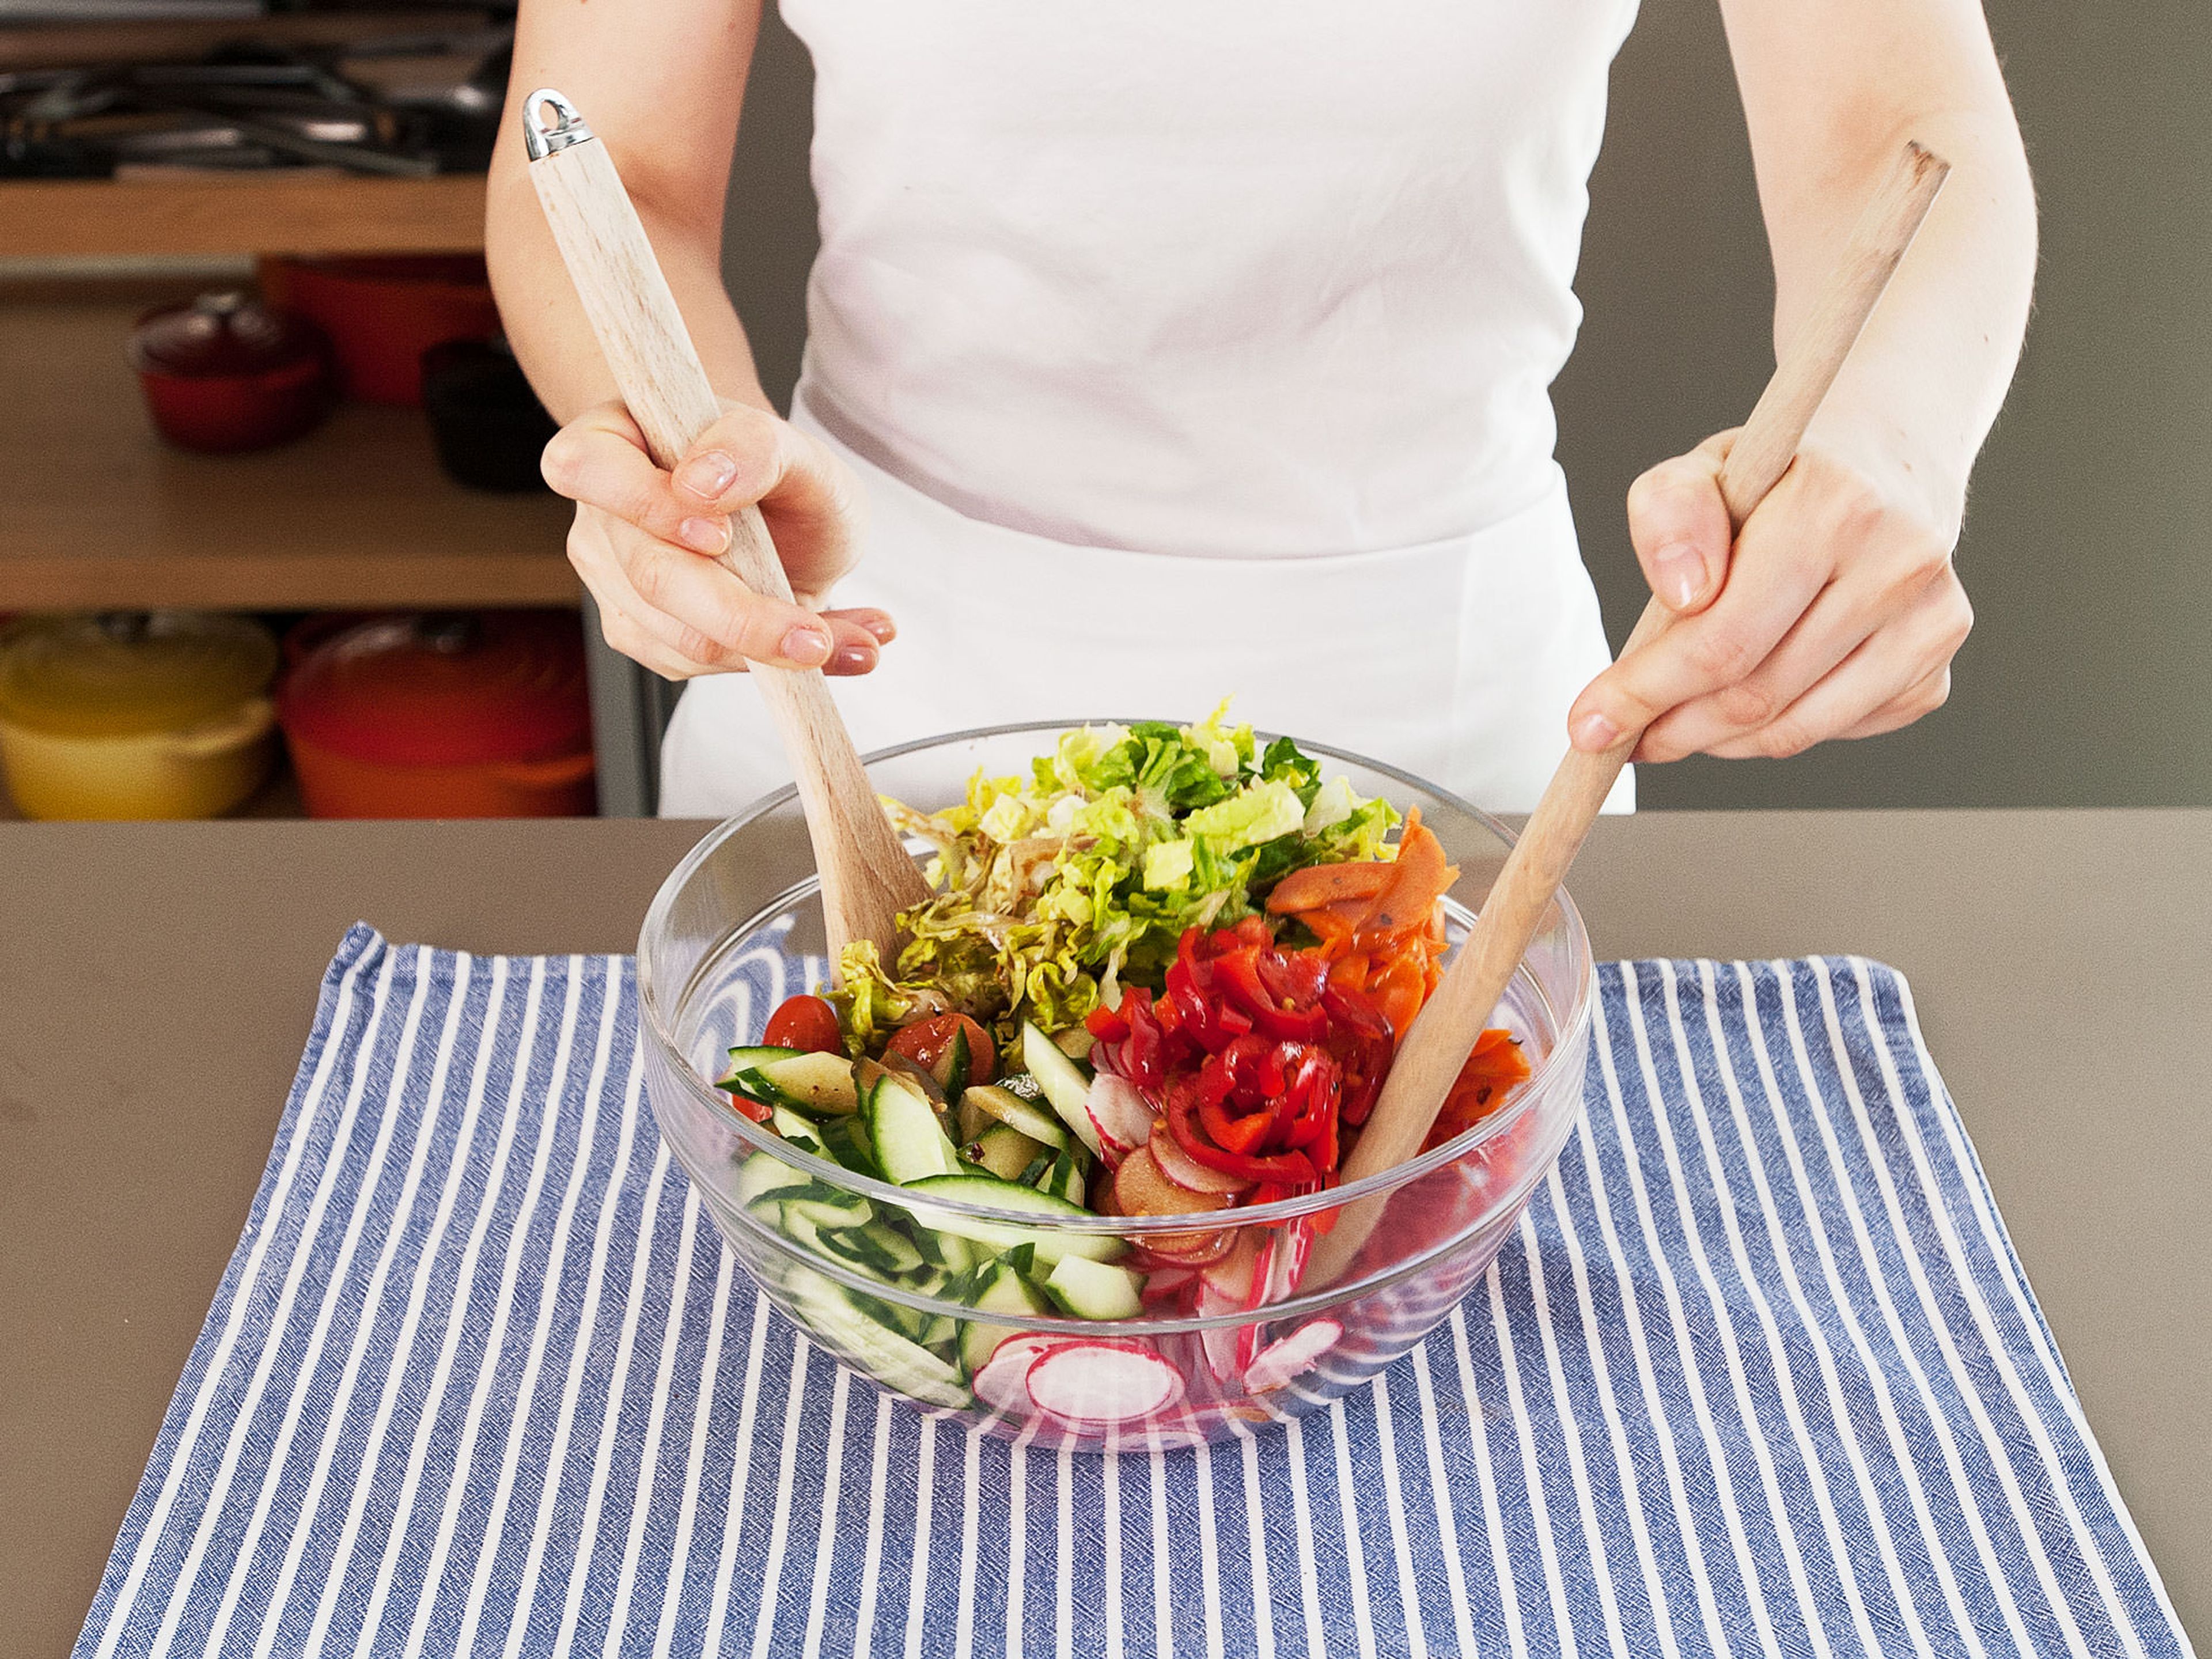 Pour dressing over the salad, a small amount at a time, and toss until well combined. Enjoy!